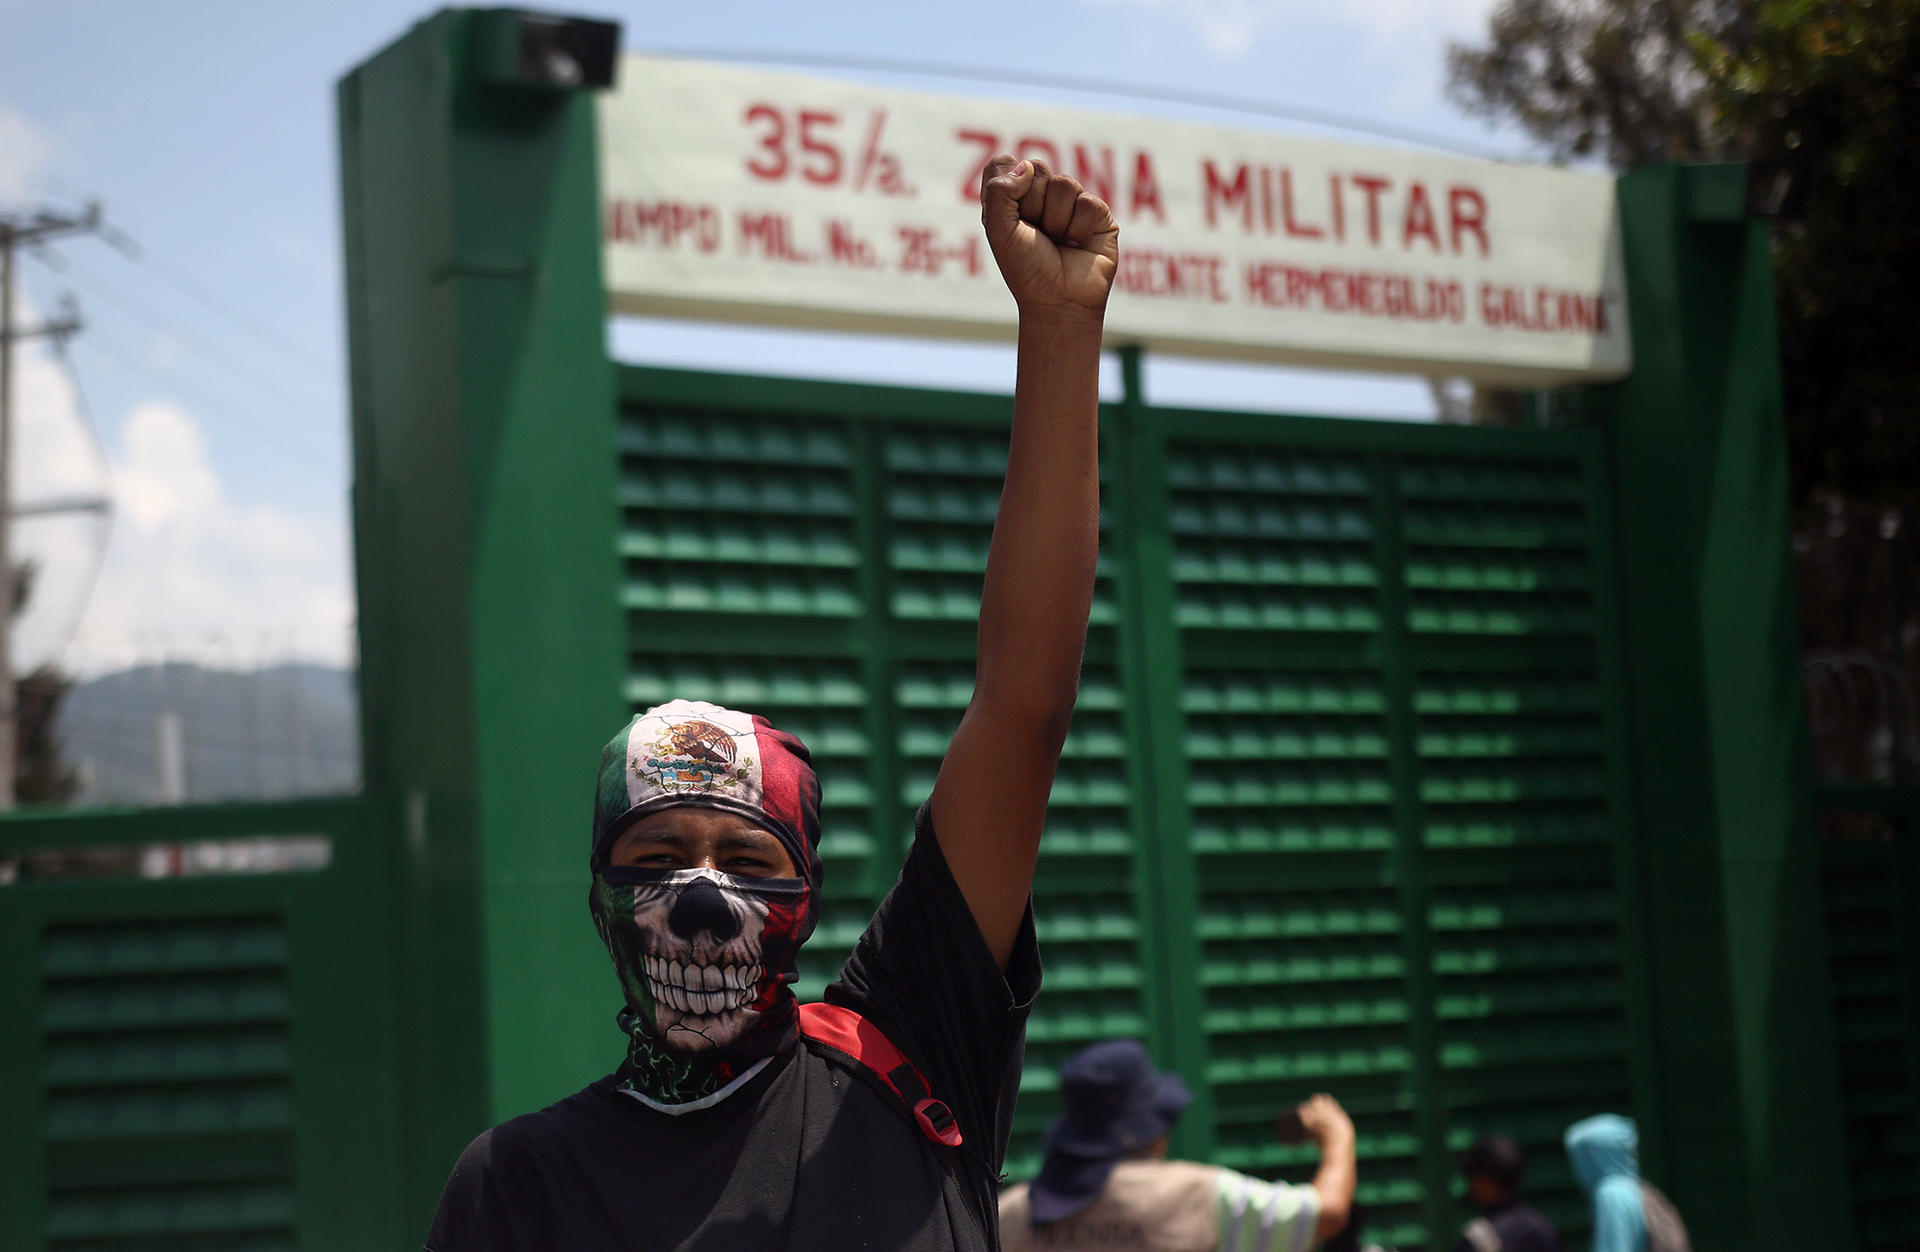 A students raises his fist during protests in front of a military barracks to demand justice for the 43 missing students from Ayotzinapa, in Chilpancingo, state of Guerrero, Mexico, 14 September 2023. EFE/José Luis de la Cruz
